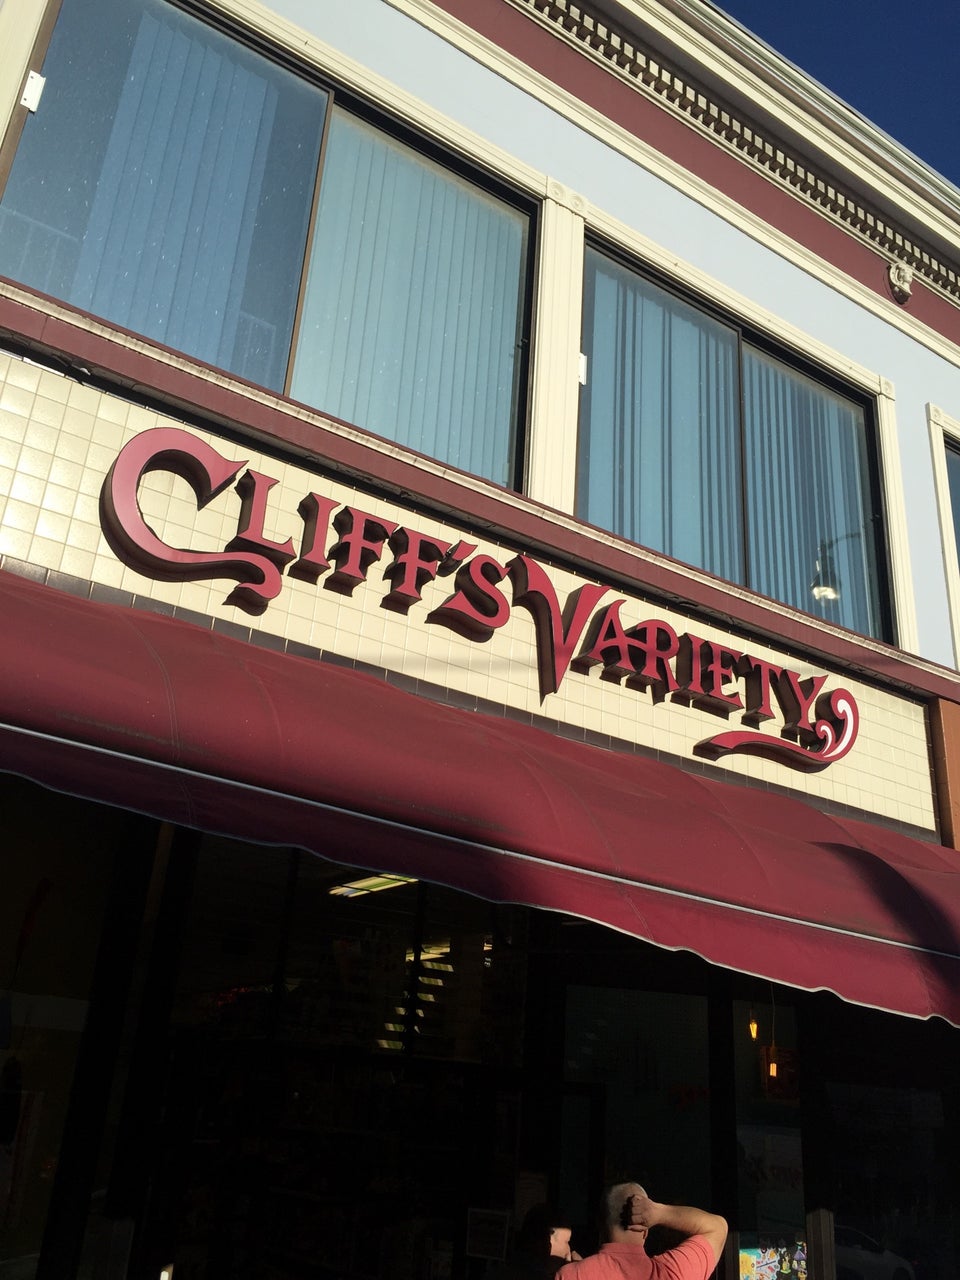 Photo of Cliff's Variety